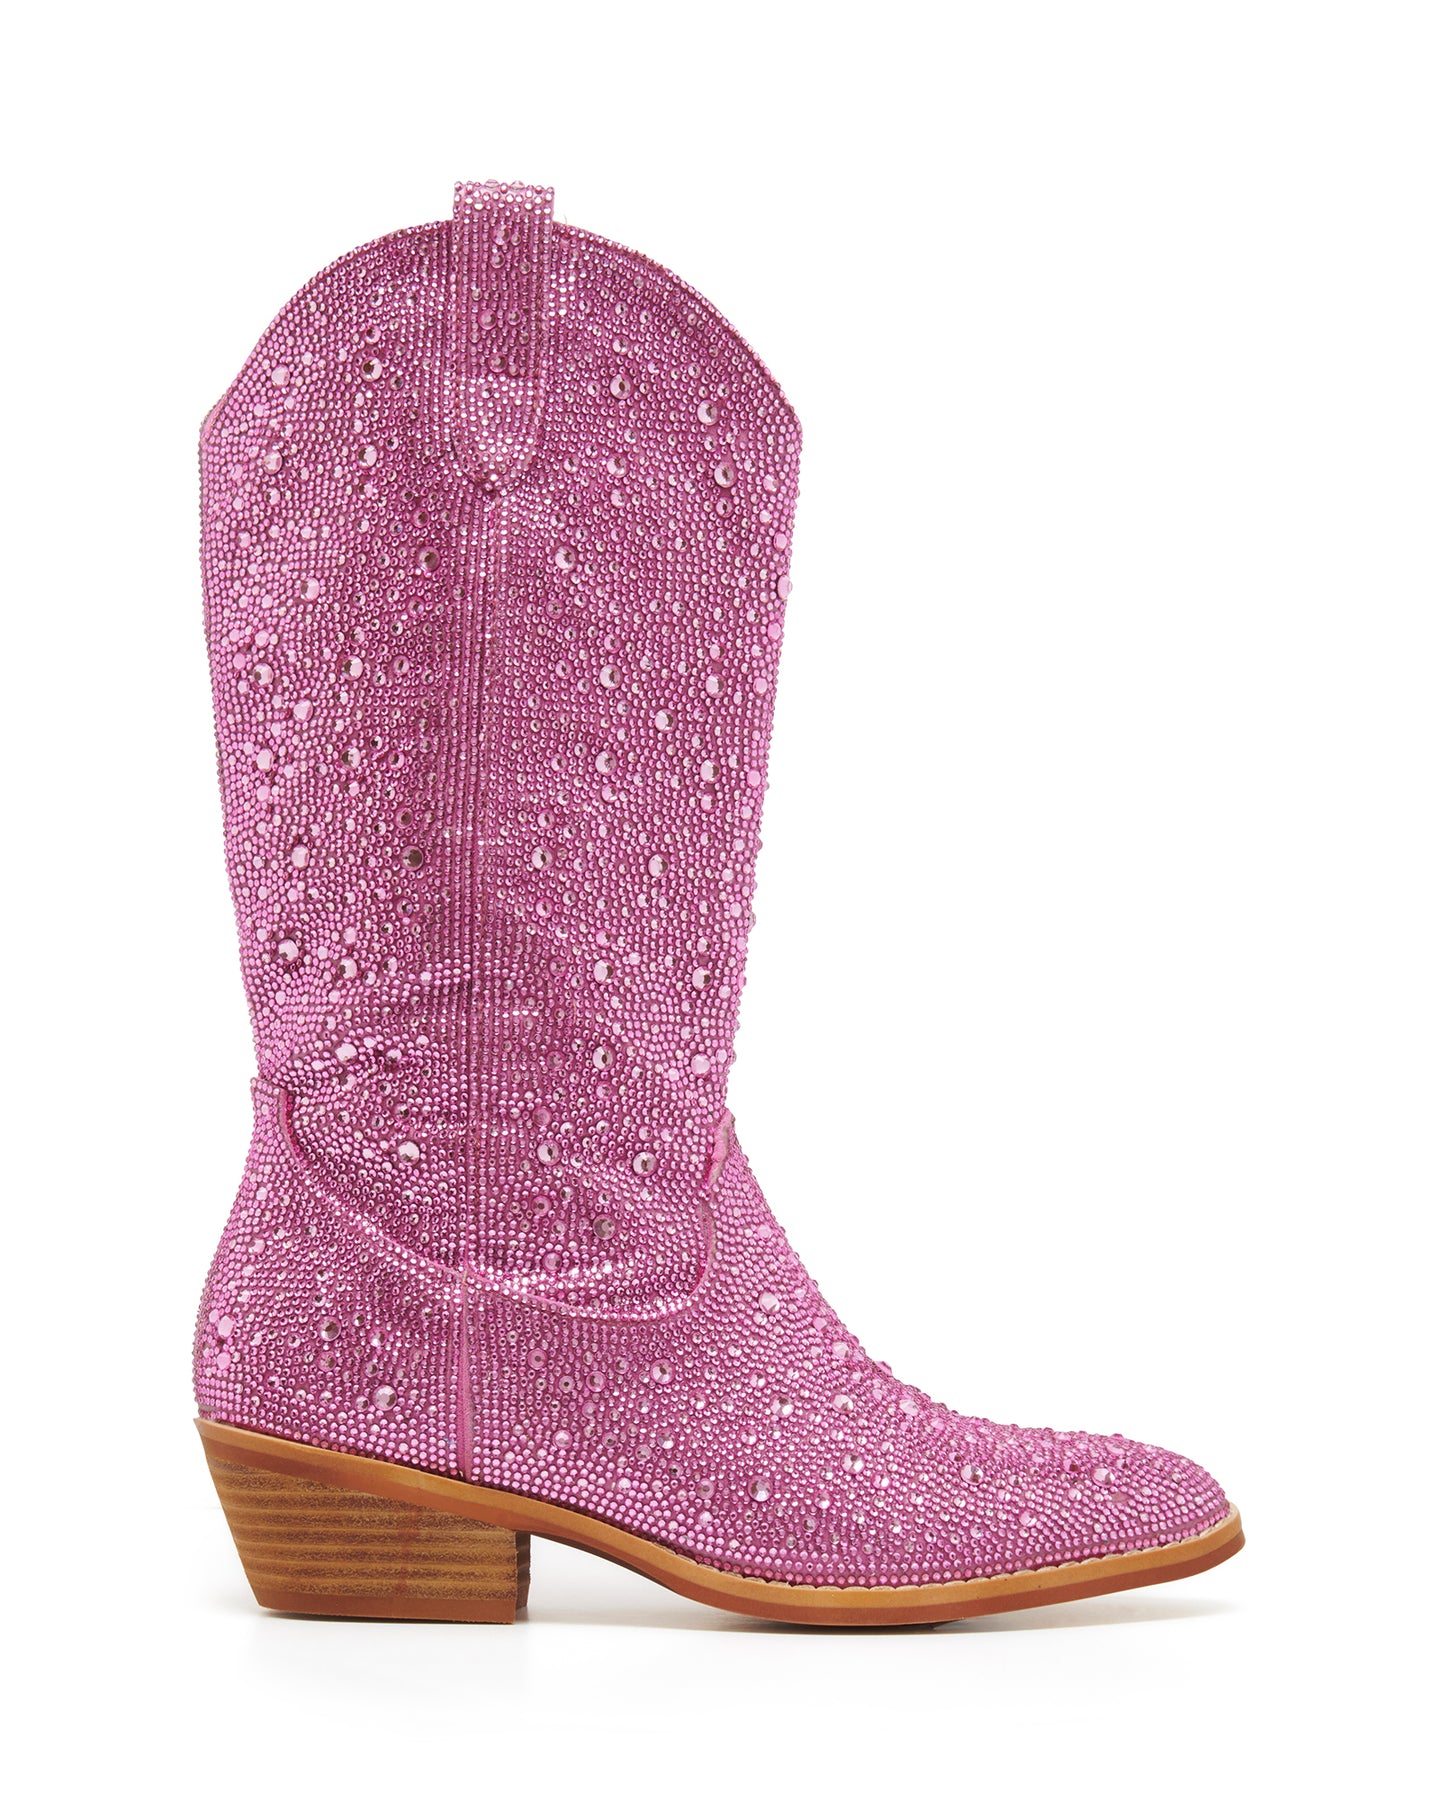 Therapy Shoes Majesty Pink Rhinestones | Women's Boots | Western ...